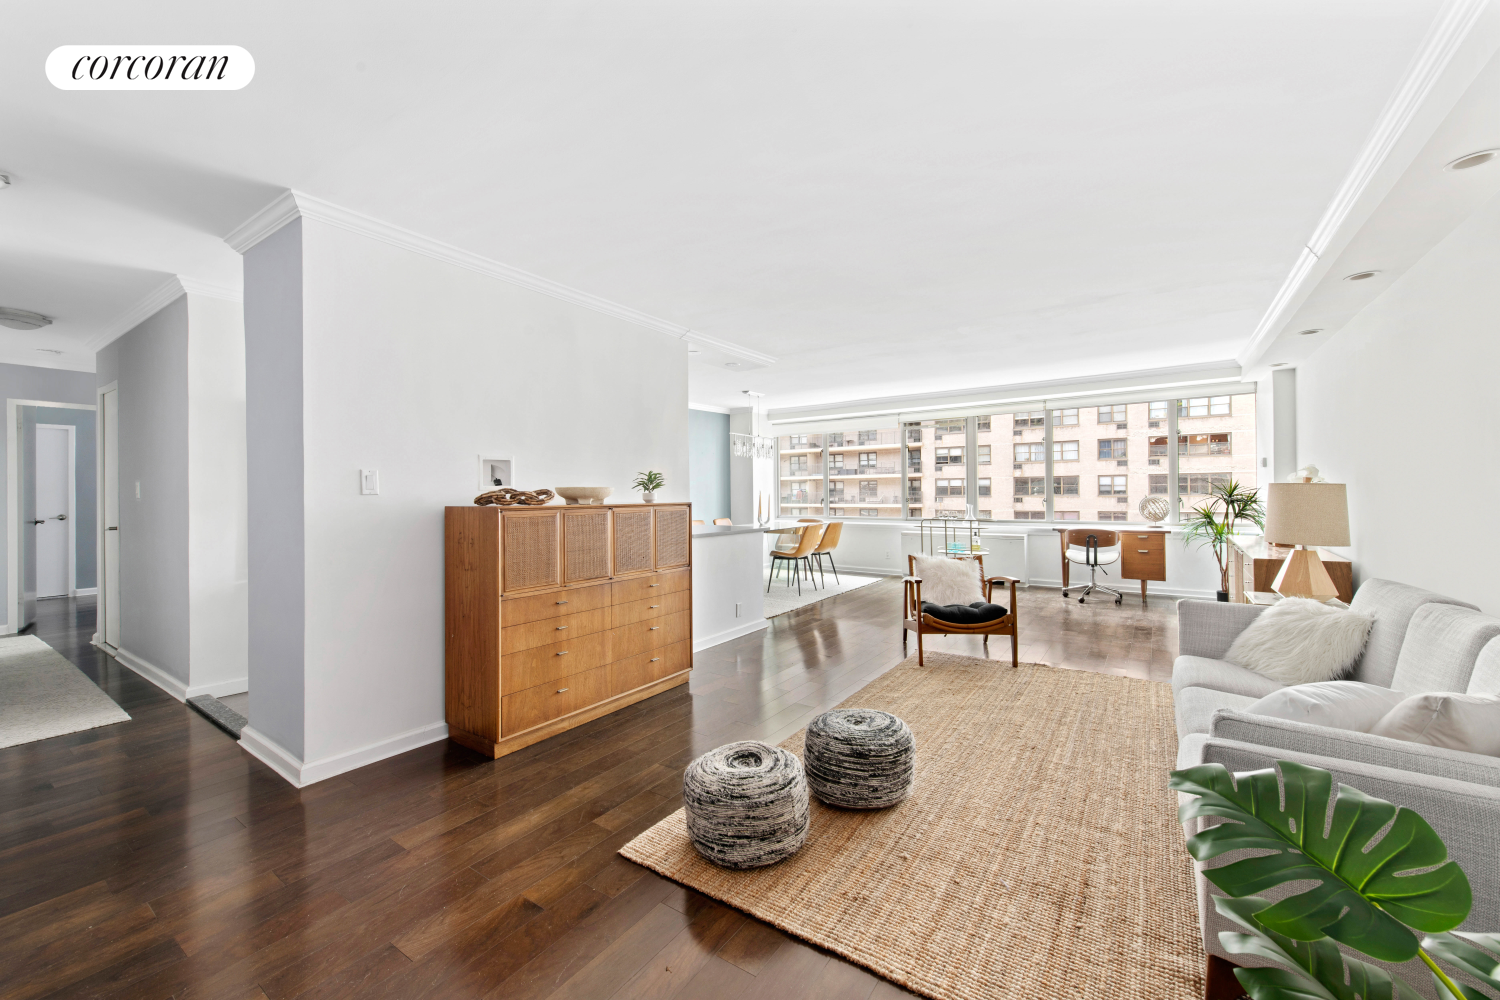 315 West 70th Street 15K, Lincoln Sq, Upper West Side, NYC - 2 Bedrooms  
2 Bathrooms  
5 Rooms - 